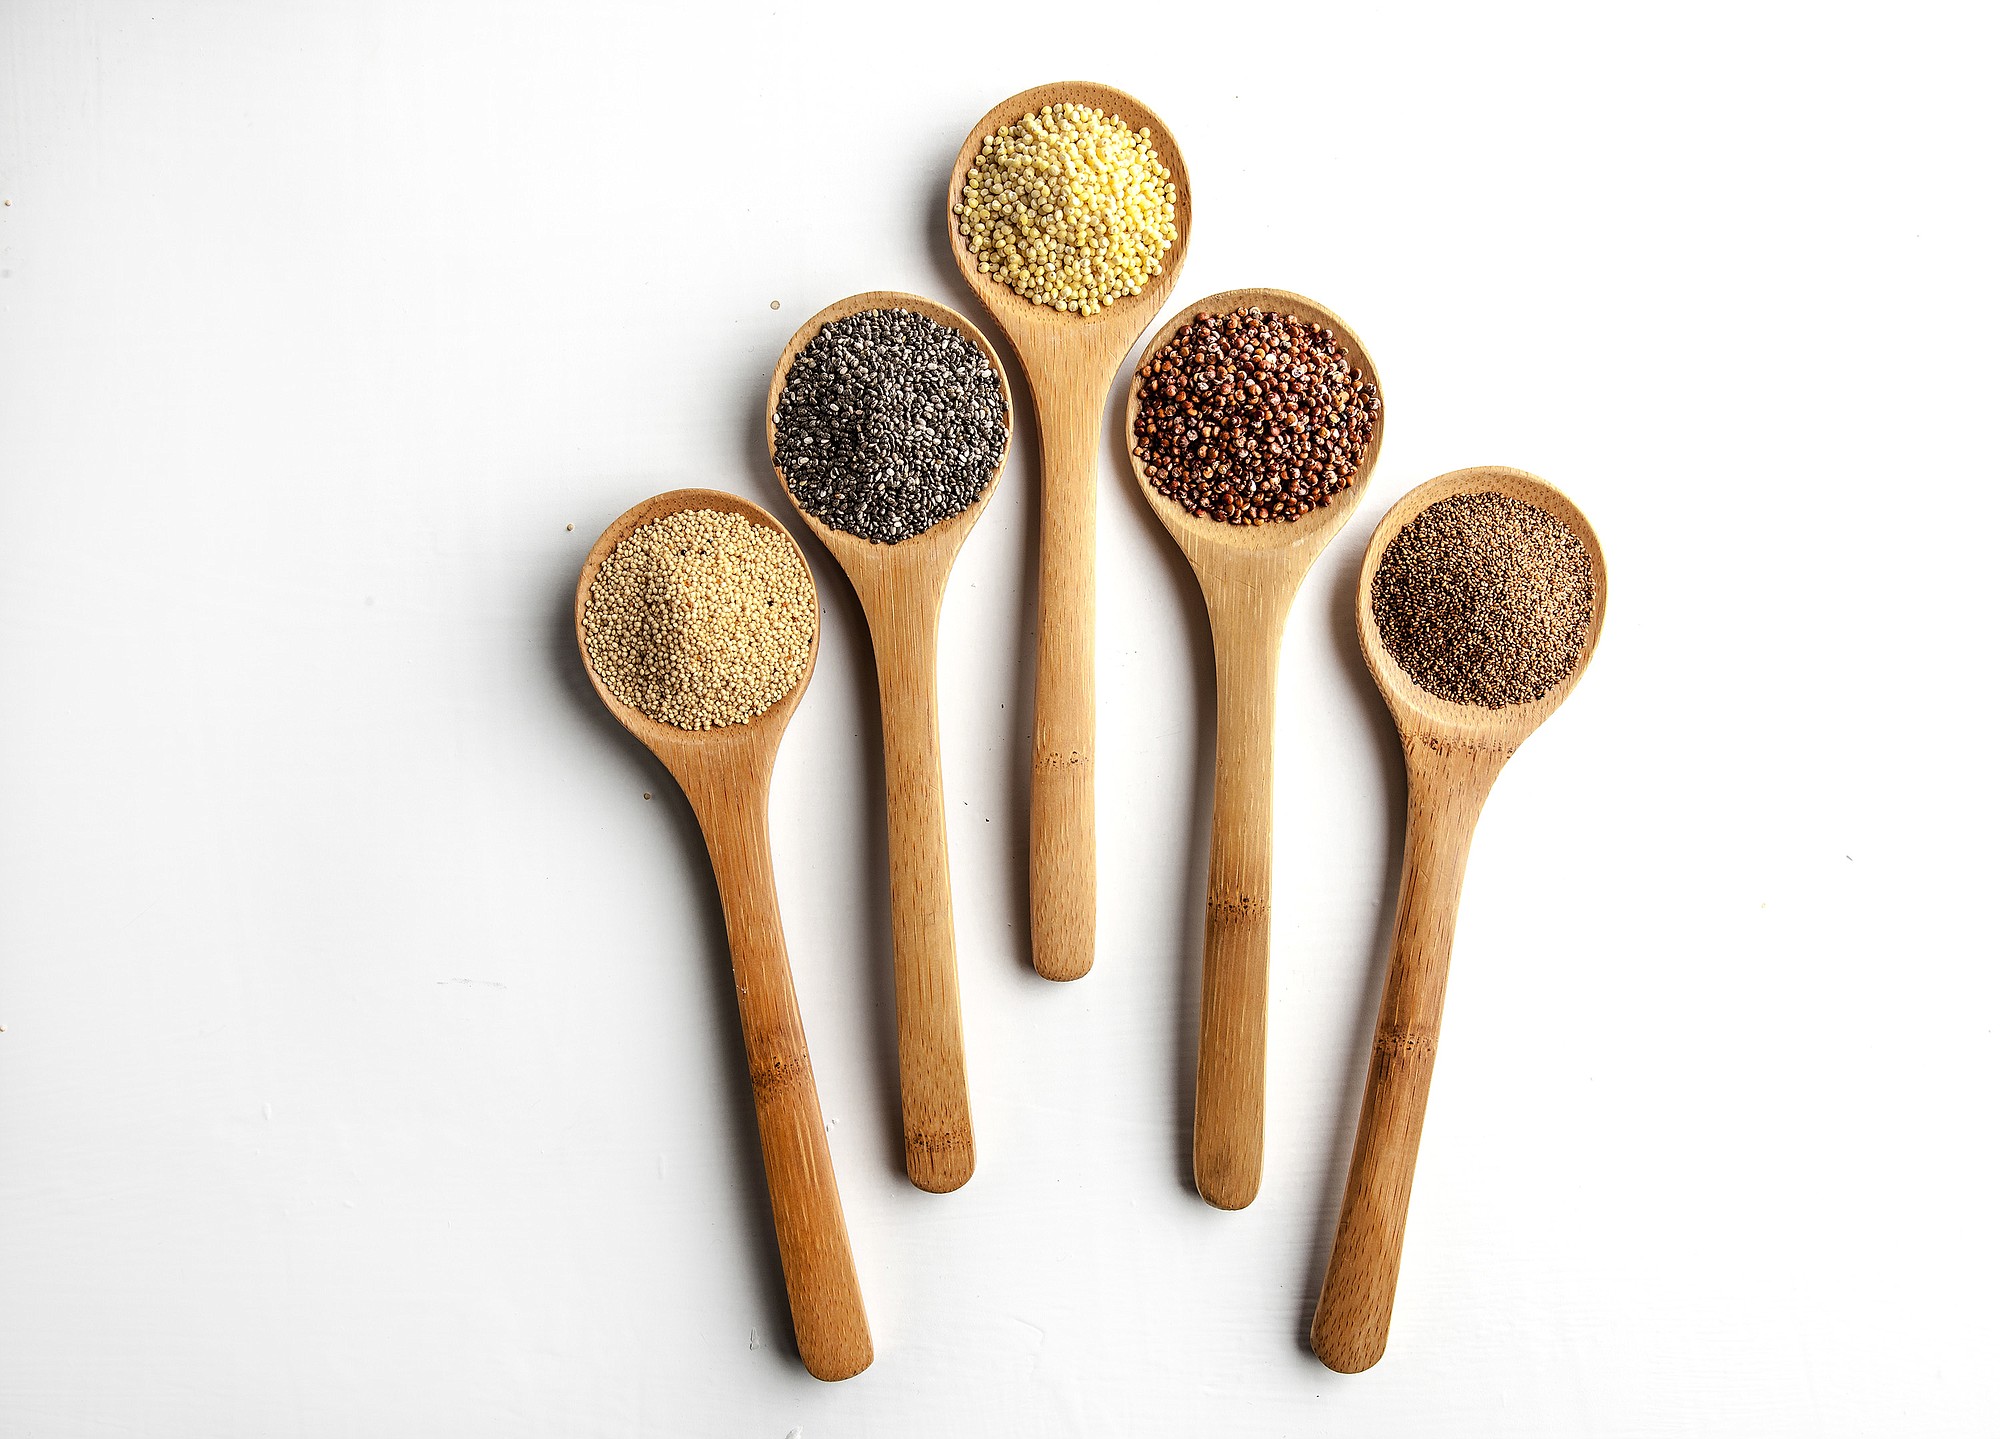 Try combining different grains, such as amaranth, from left, chia, millet, quinoa and teff.